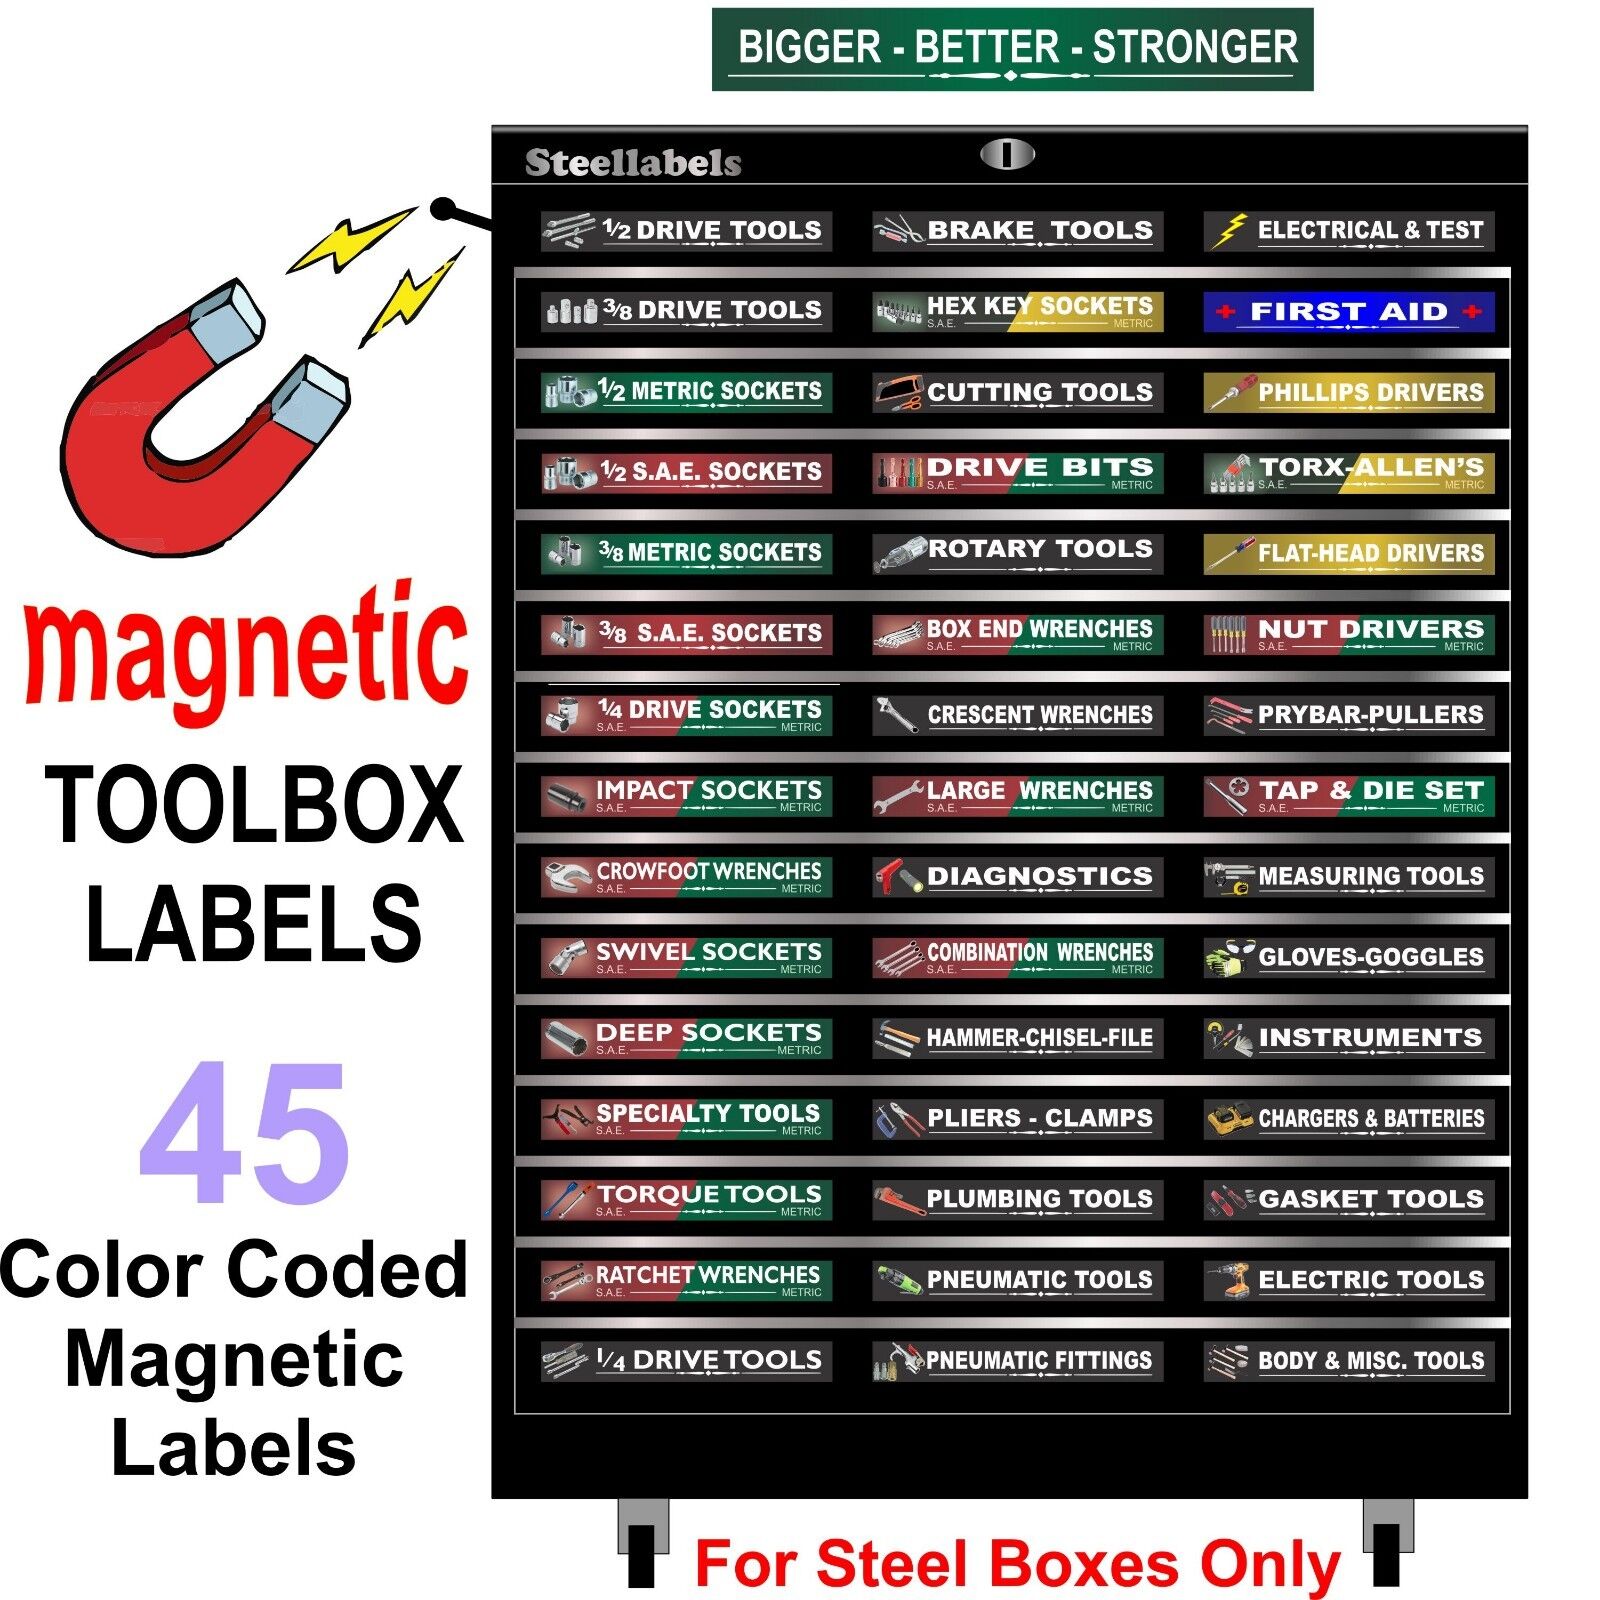 Ultimate Magnetic TOOLBOX LABELS fits all steel boxes tool chest & cabinets  SteelLabels.com UMAGG001 - фотография #2